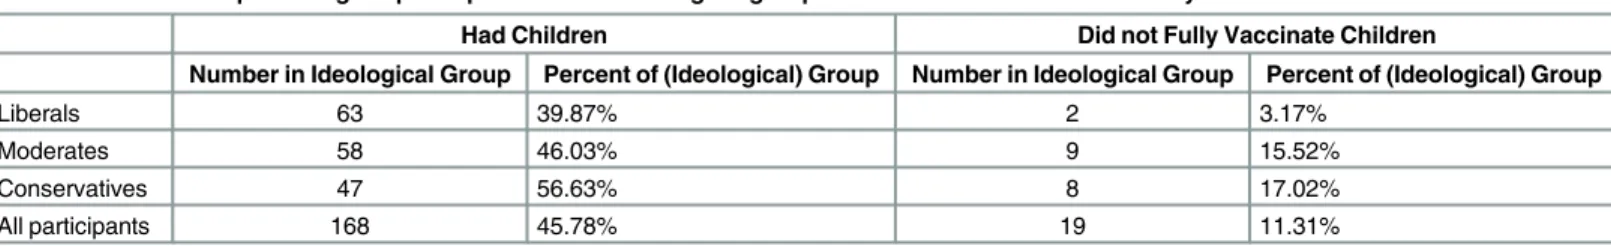 Table 2. Number and percentage of participants in each ideological group who had children and did not fully vaccinate their children.